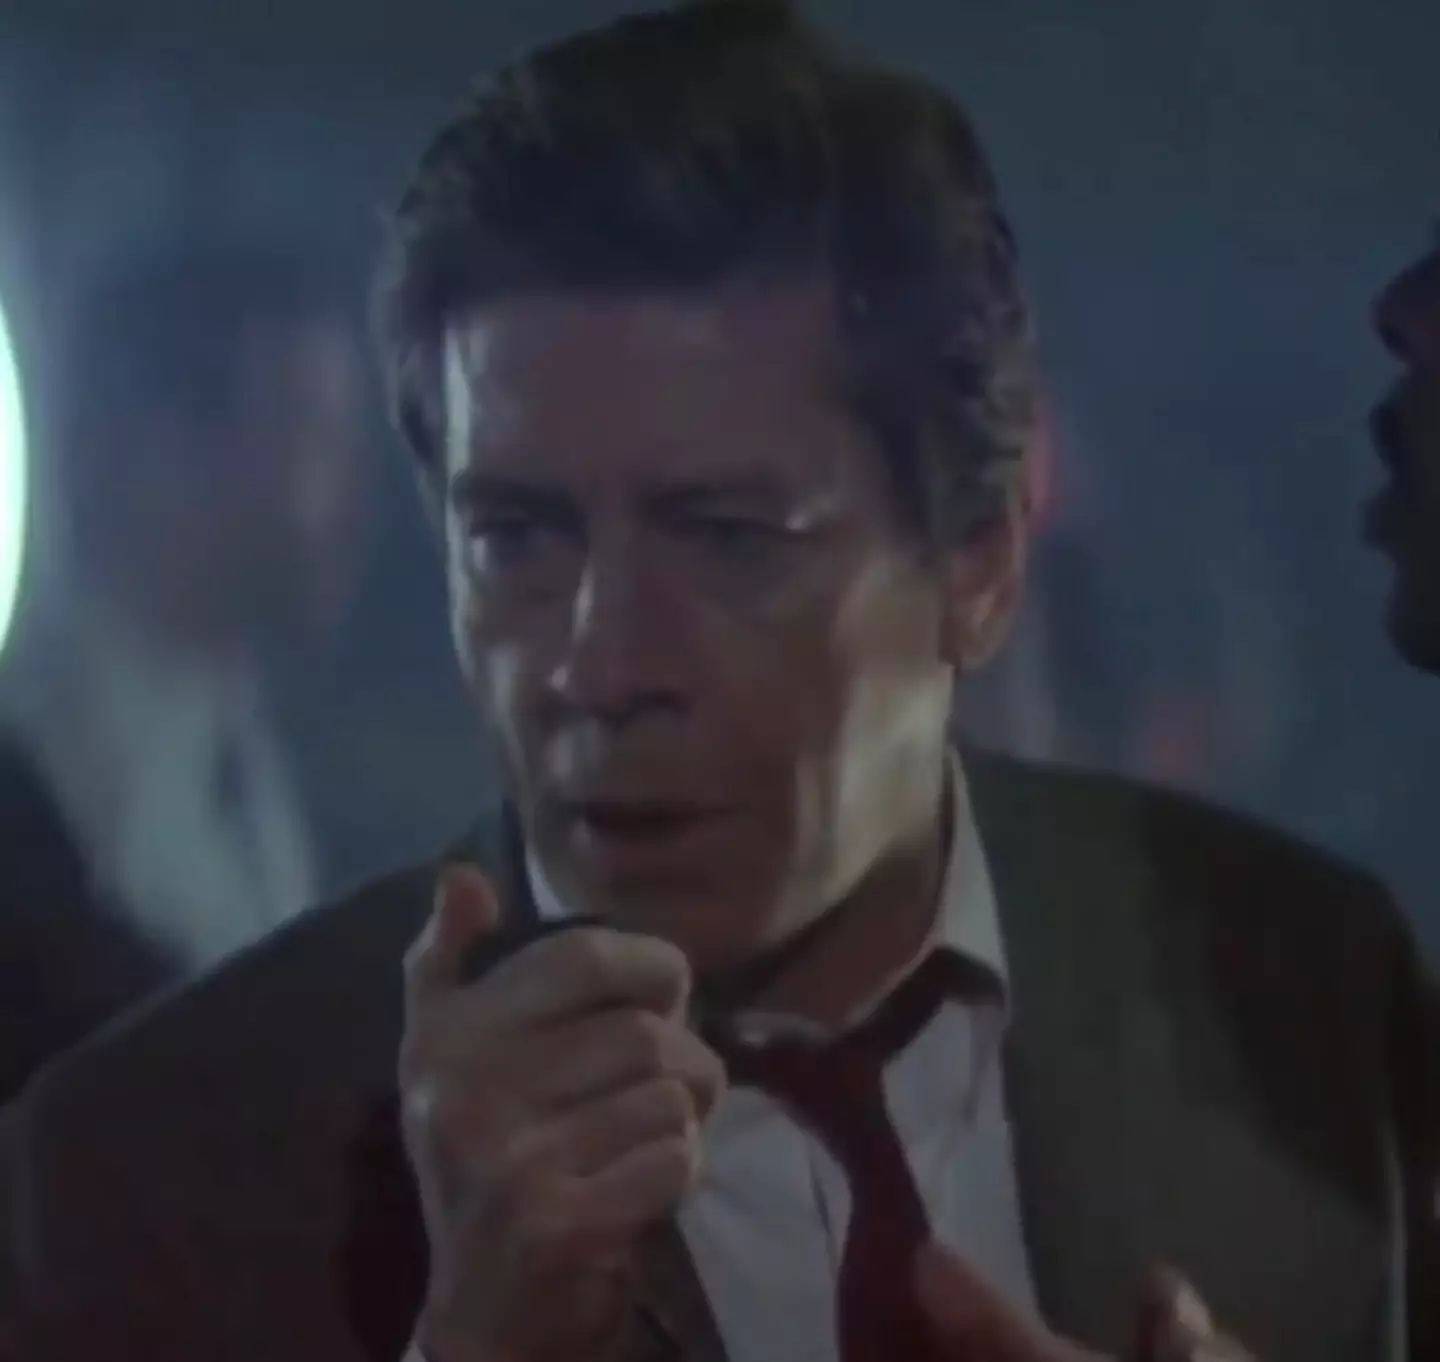 Paul Gleason played police chief Dwayne T. Robinson in the 1988 movie.